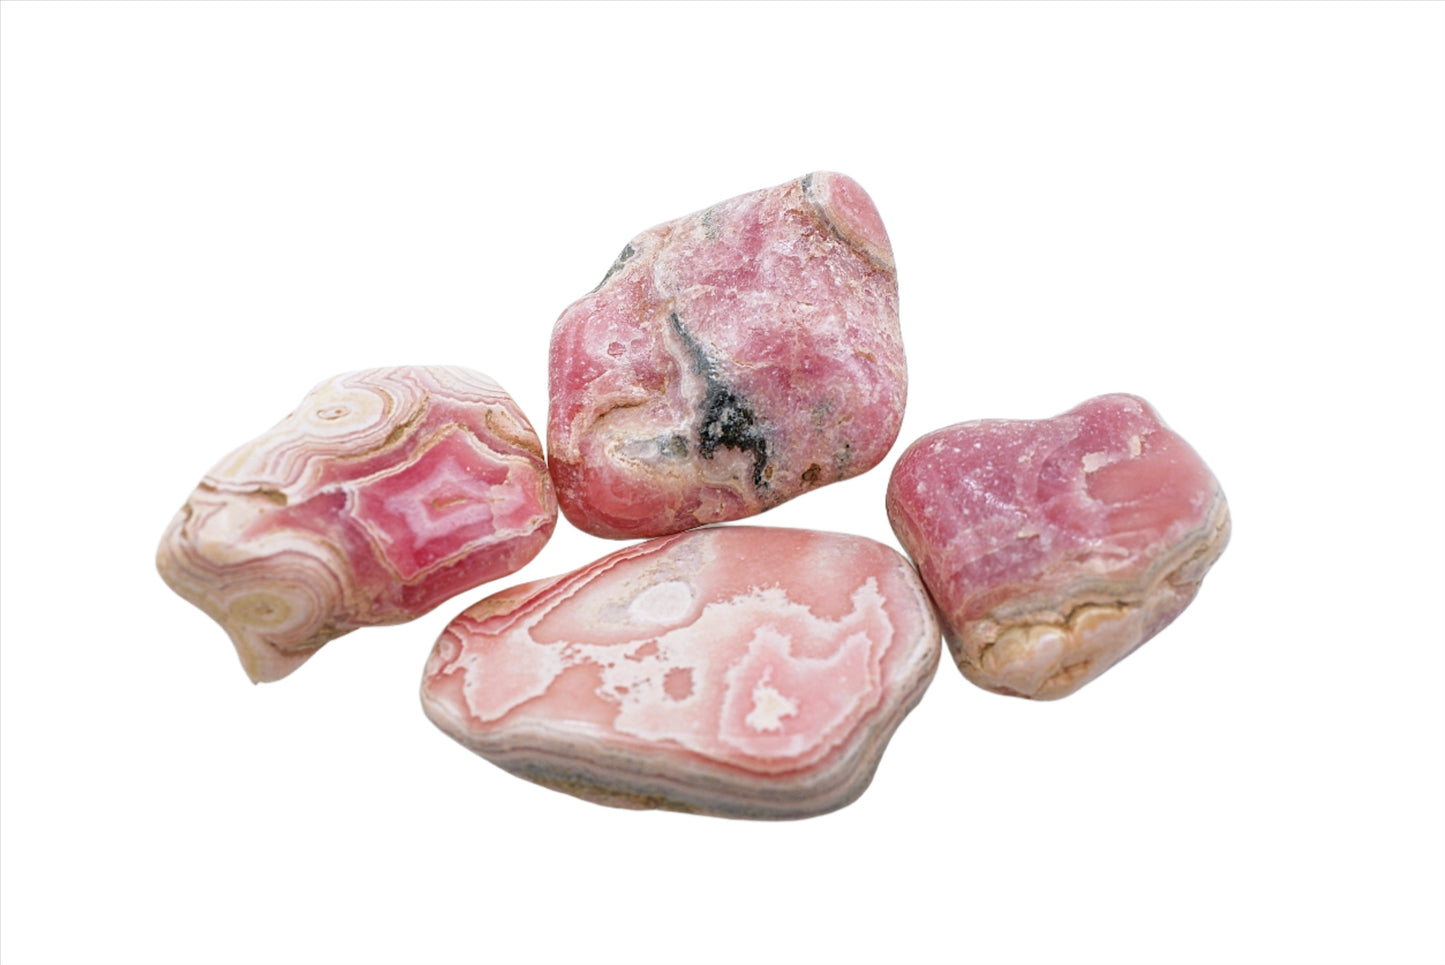 Natural, Hand-Selected Rhodochrosite Tumbled Stone Individual Pieces